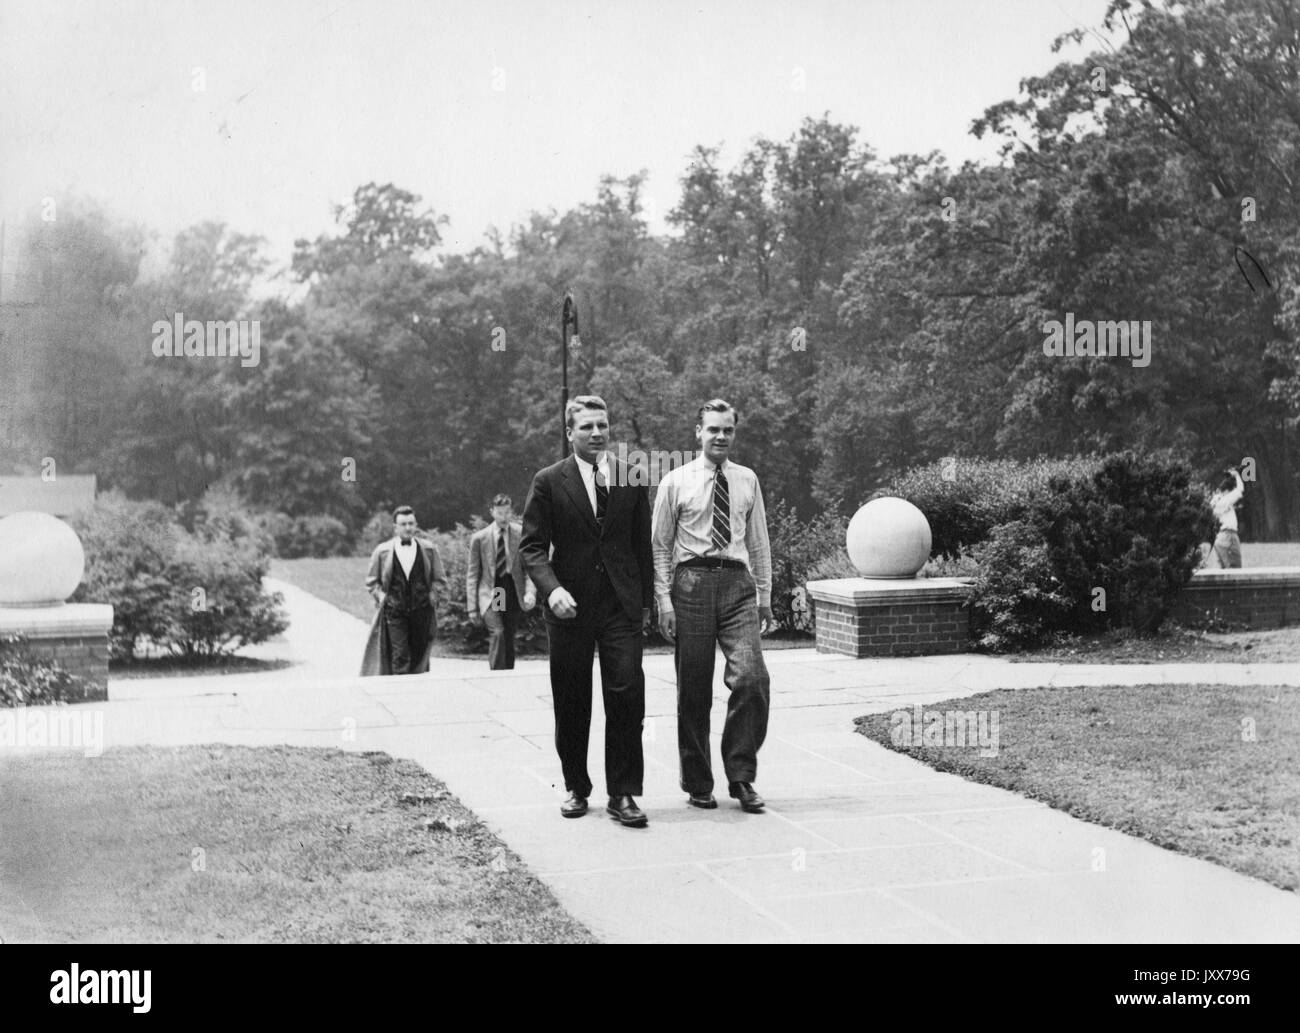 Student Life, Forrest Hood Adams, George Newton, Candid photograph, Walking outdoors, 1938. Stock Photo